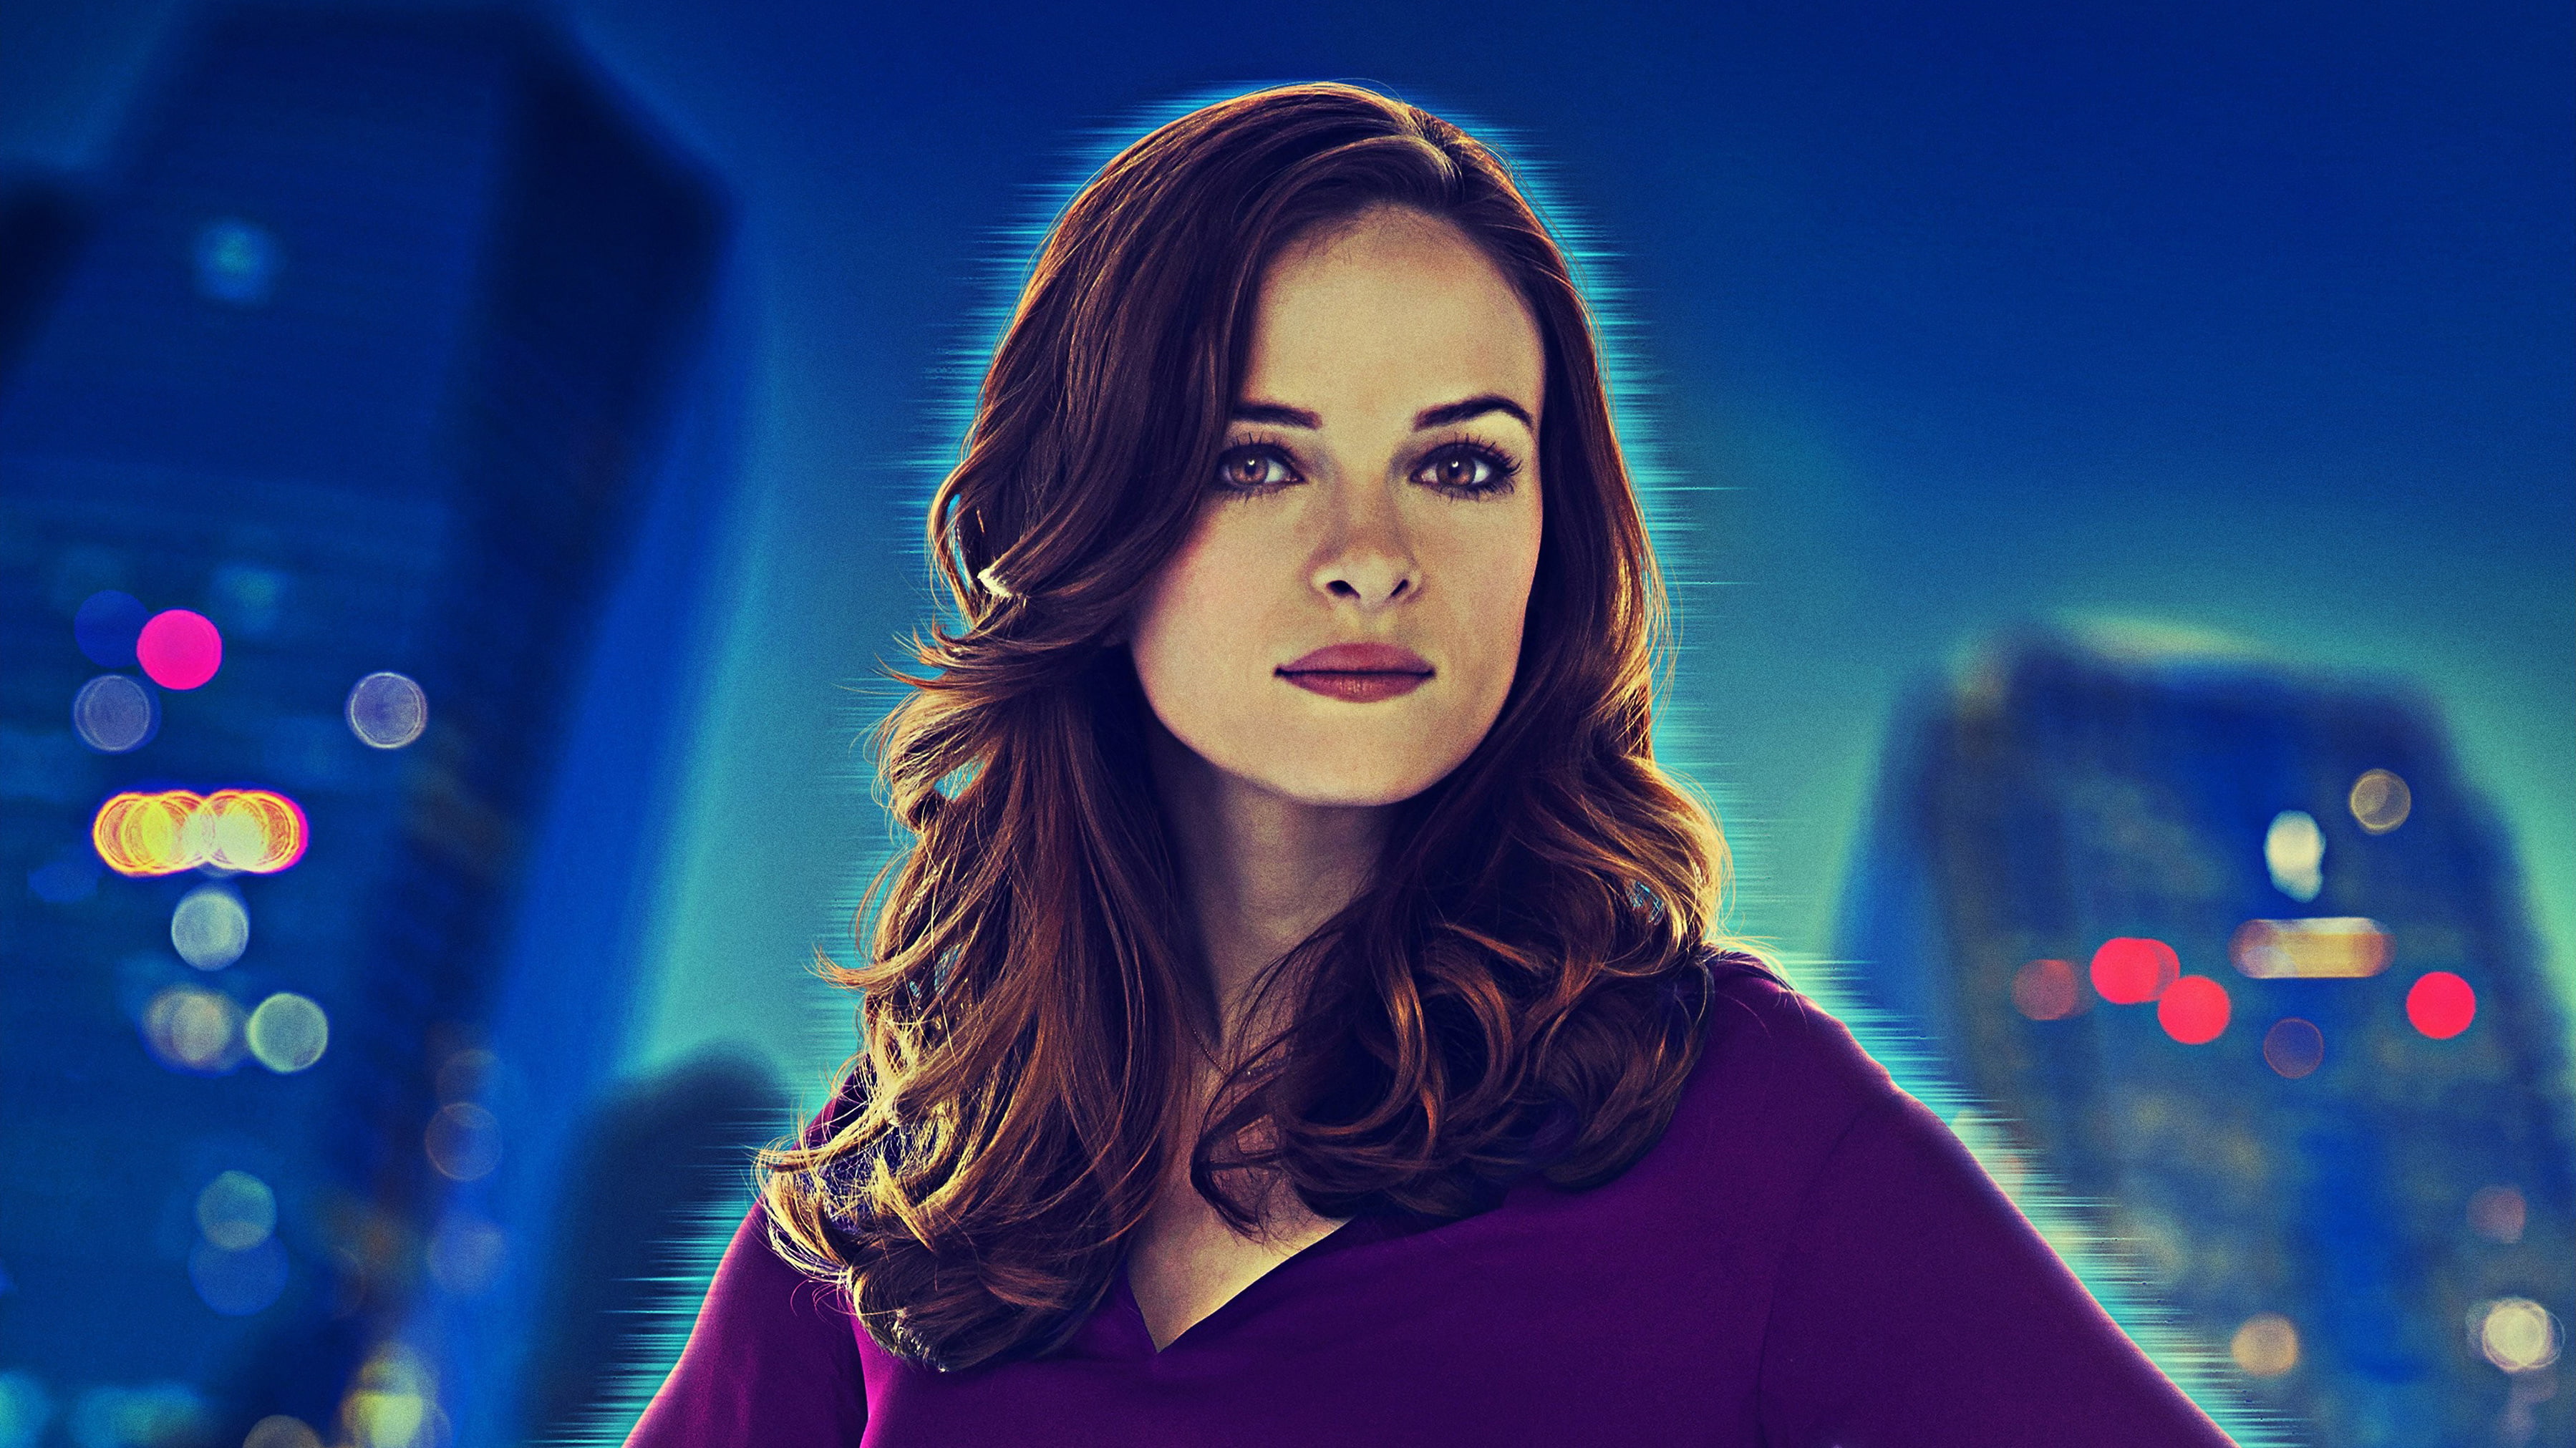 danielle panabaker, hd, the flash, tv shows, one person, portrait